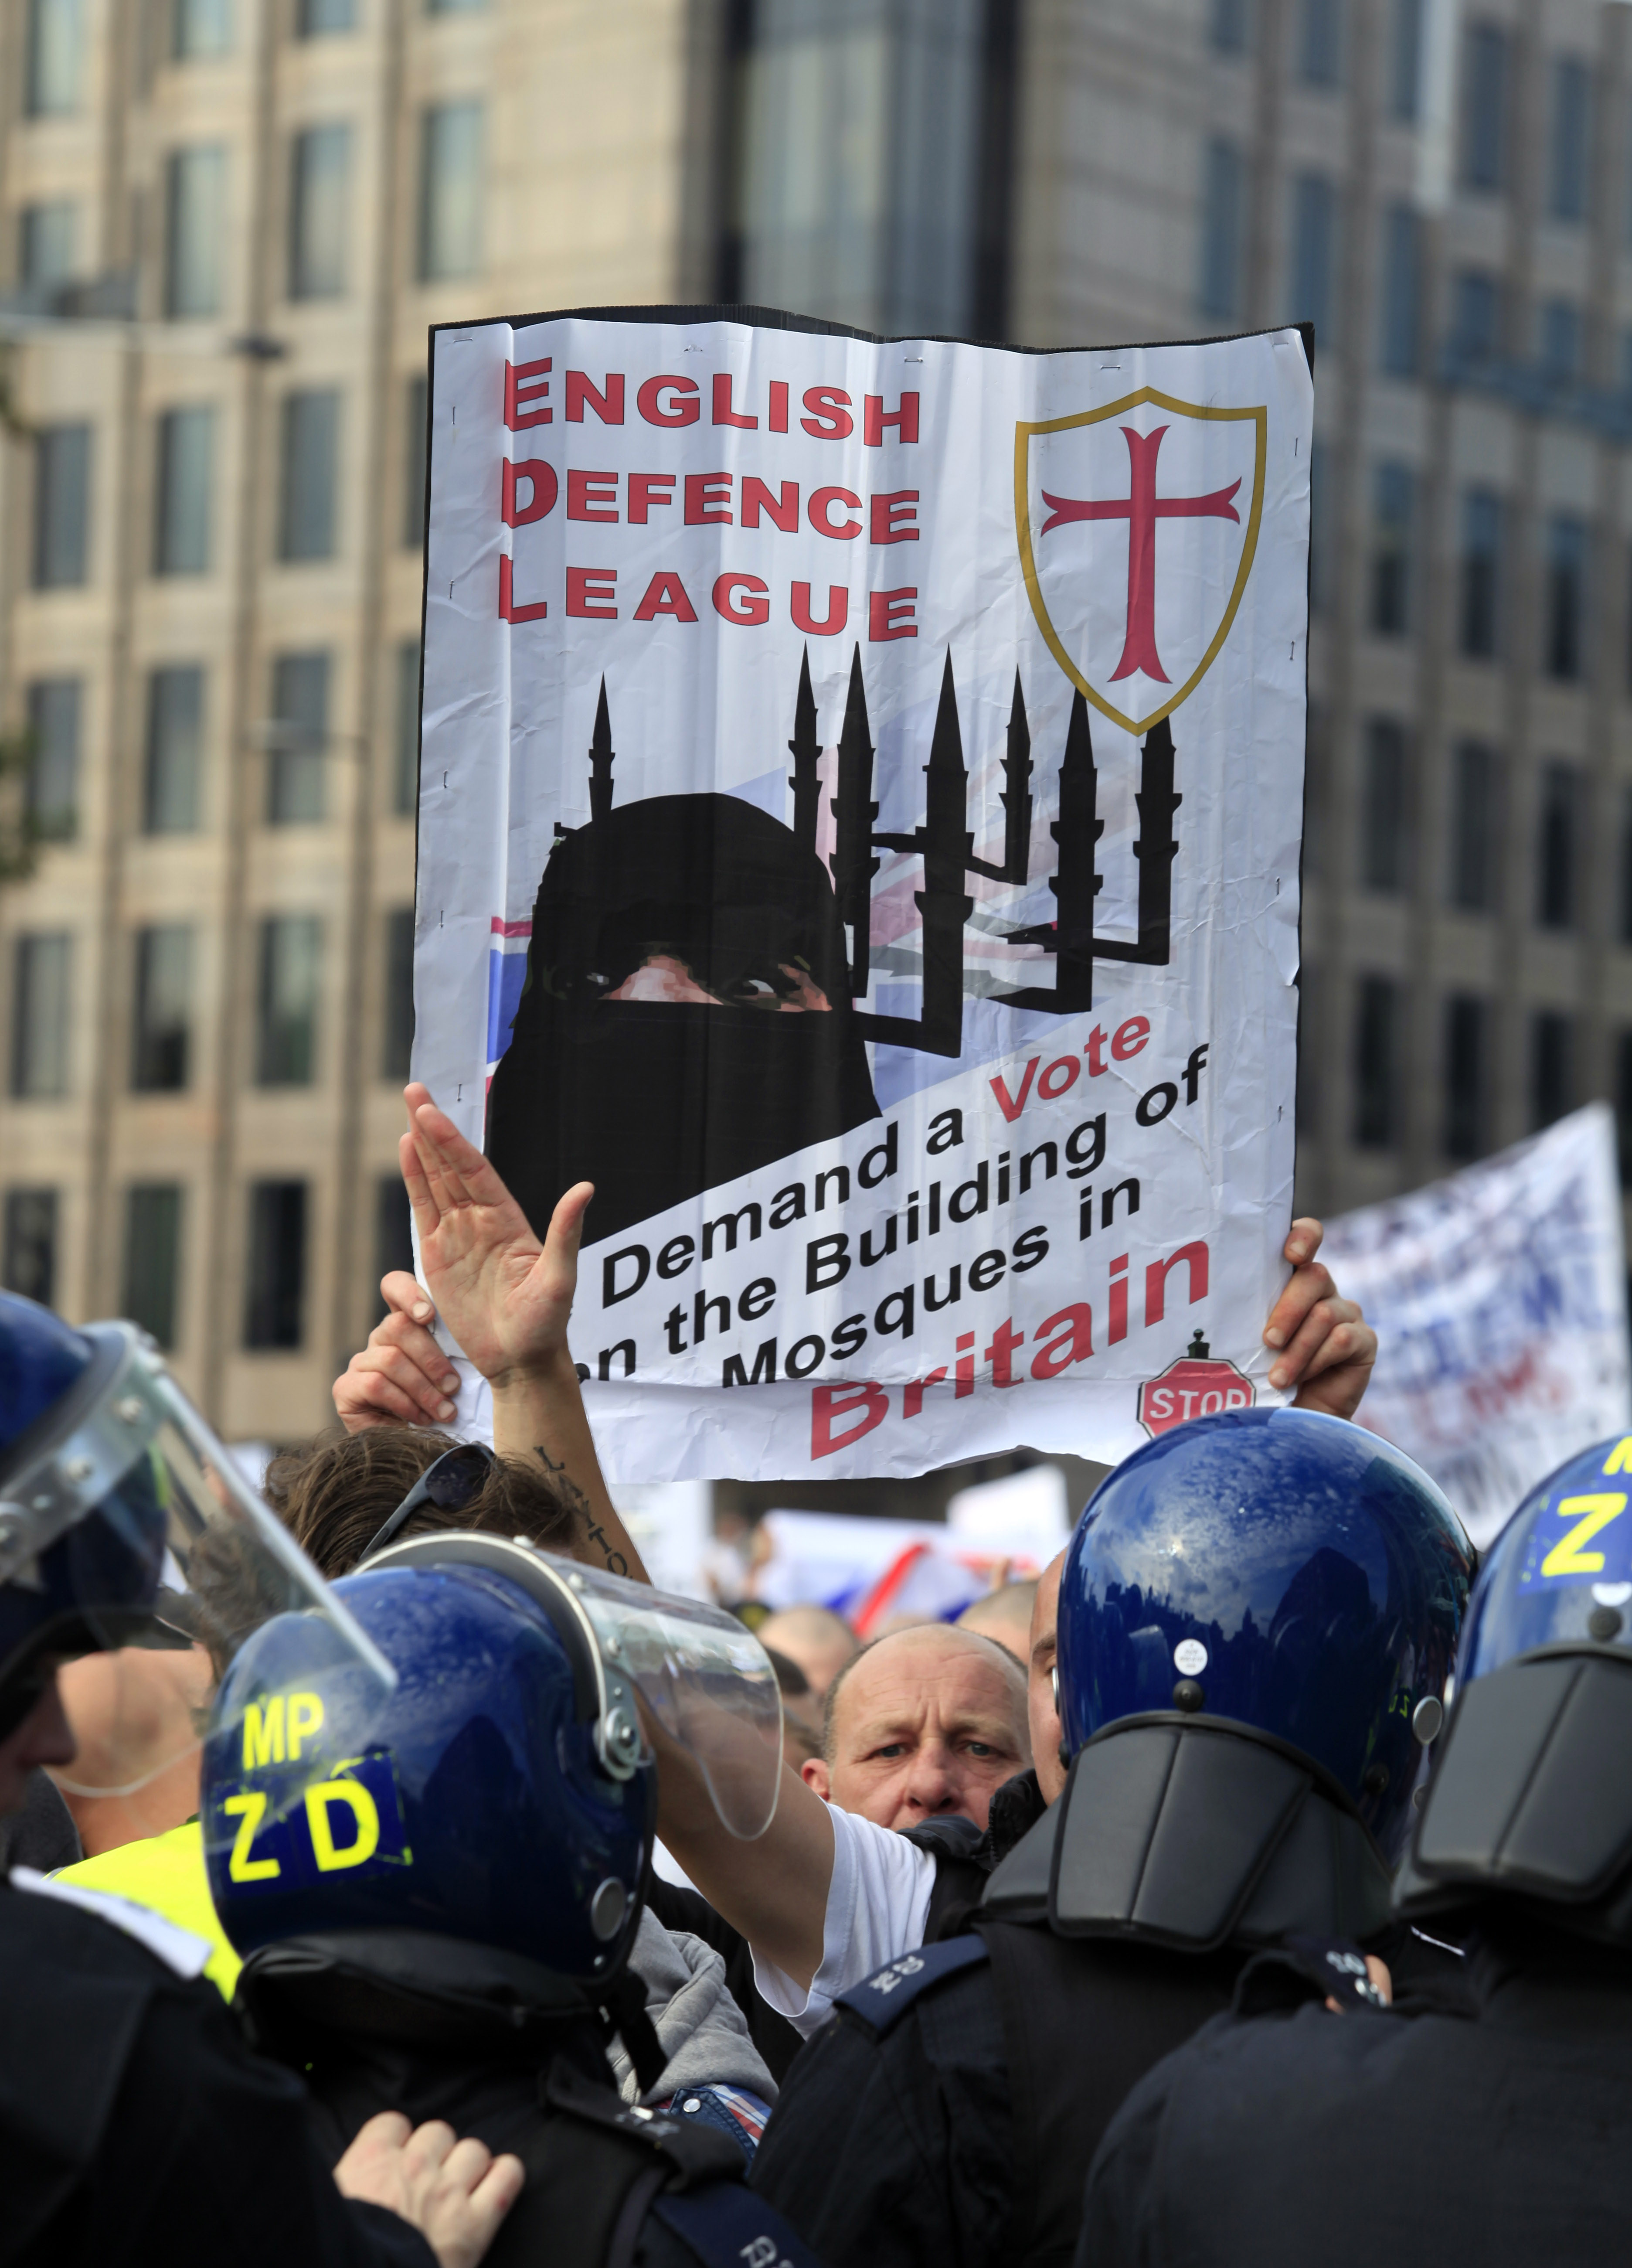 Muslimer, Swedish Defence League, Protester, Högerextrema, Demonstration, English Defence League